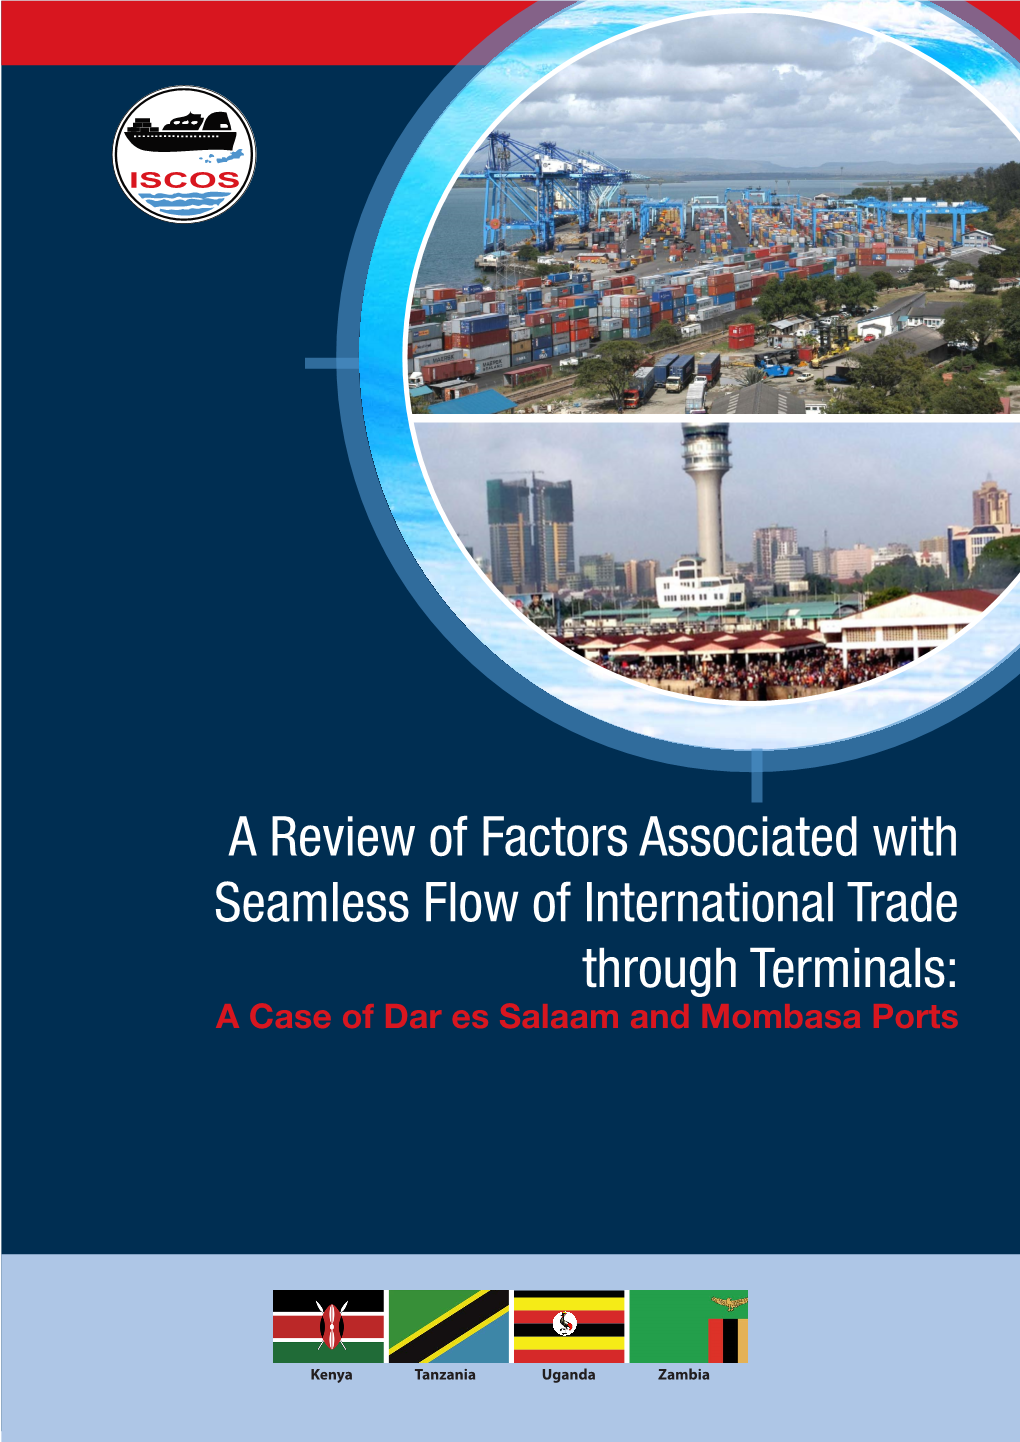 A Review of Factors Associated with Seamless Flow of International Trade Through Terminals: a Case of Dar Es Salaam and Mombasa Ports